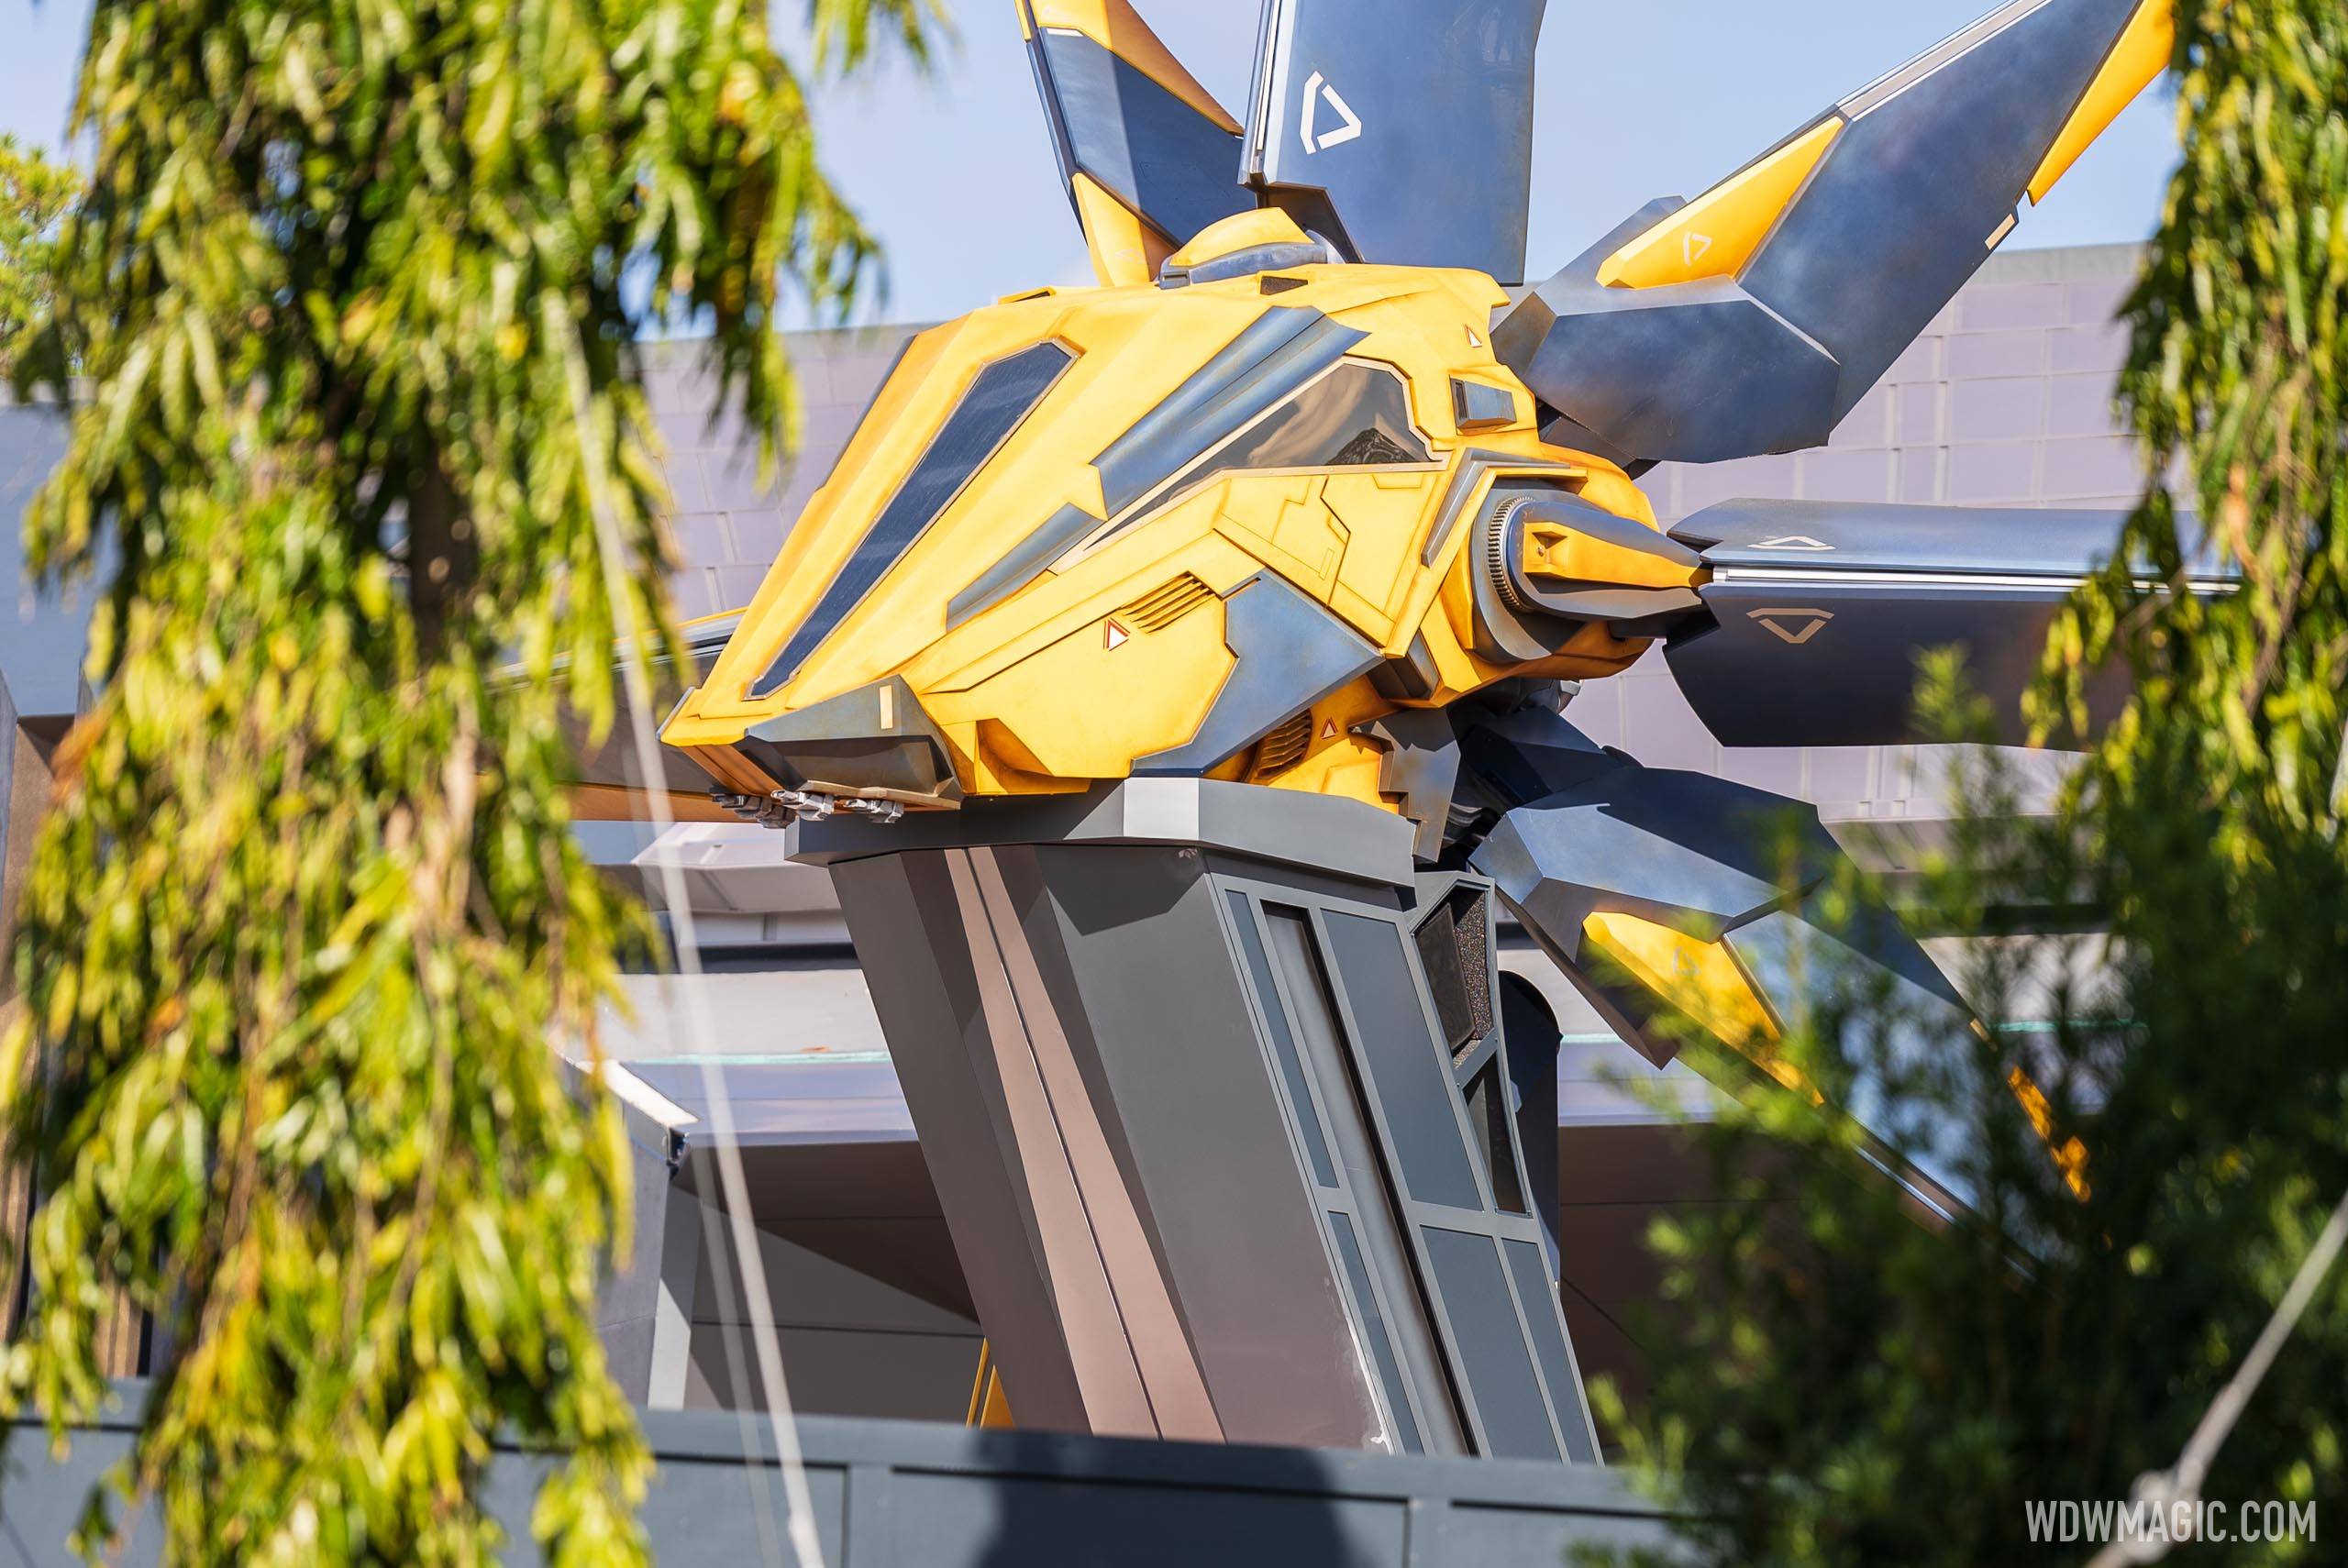 More finishing details added to the Guardians of the Galaxy Nova Corps Starblaster at EPCOT